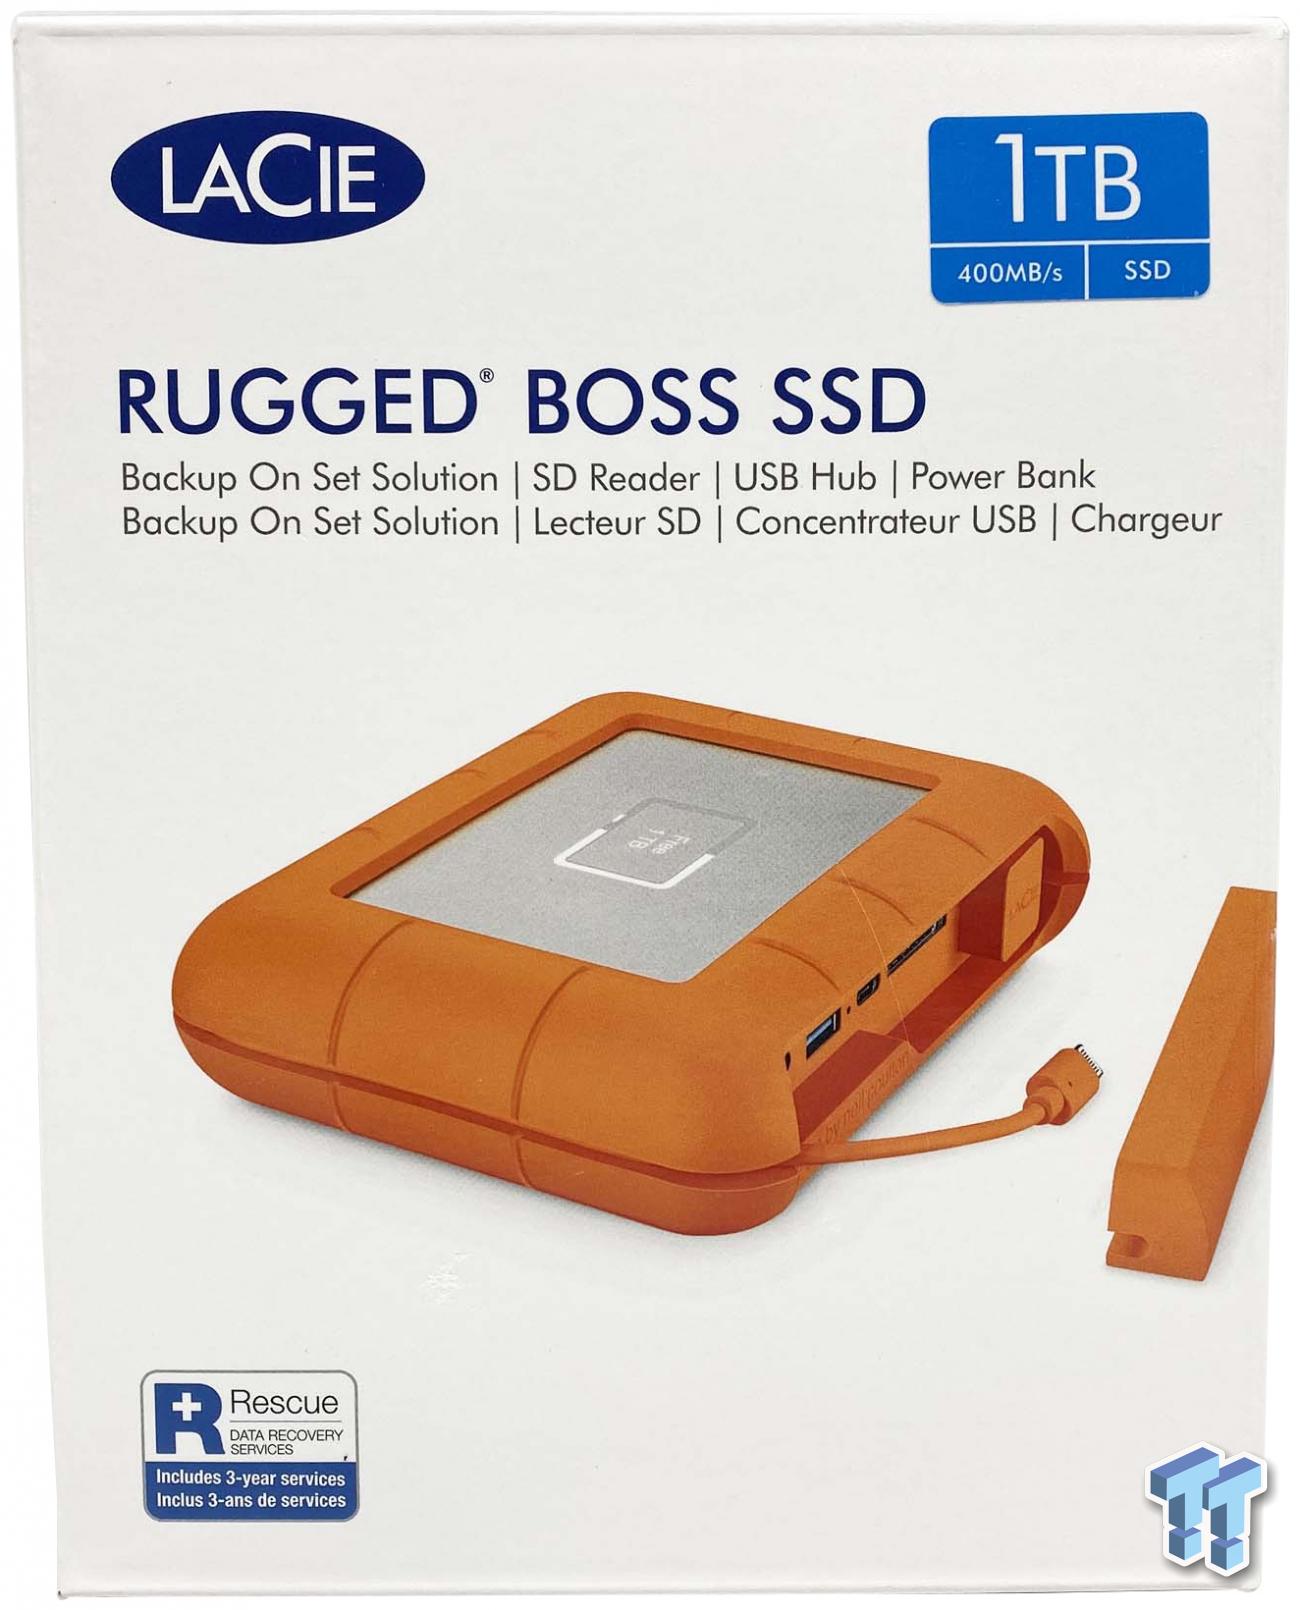 LaCie Rugged BOSS SSD 1TB Review